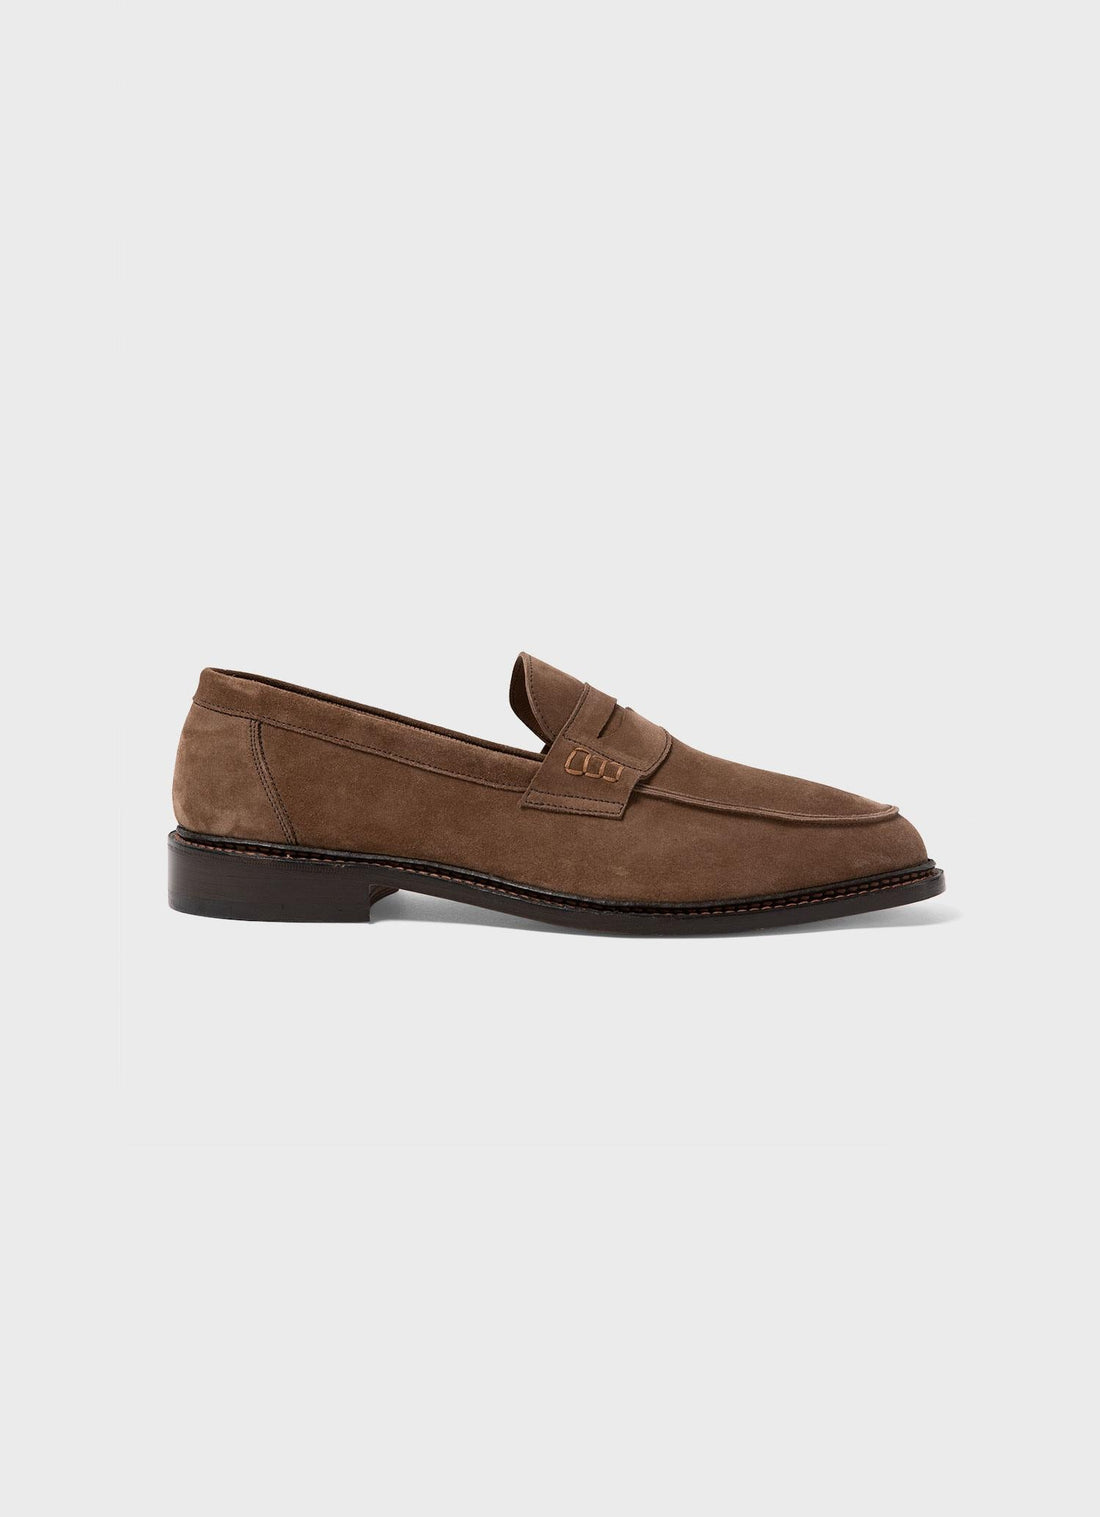 Men's Sunspel and Trickers Suede Loafer in Light Brown